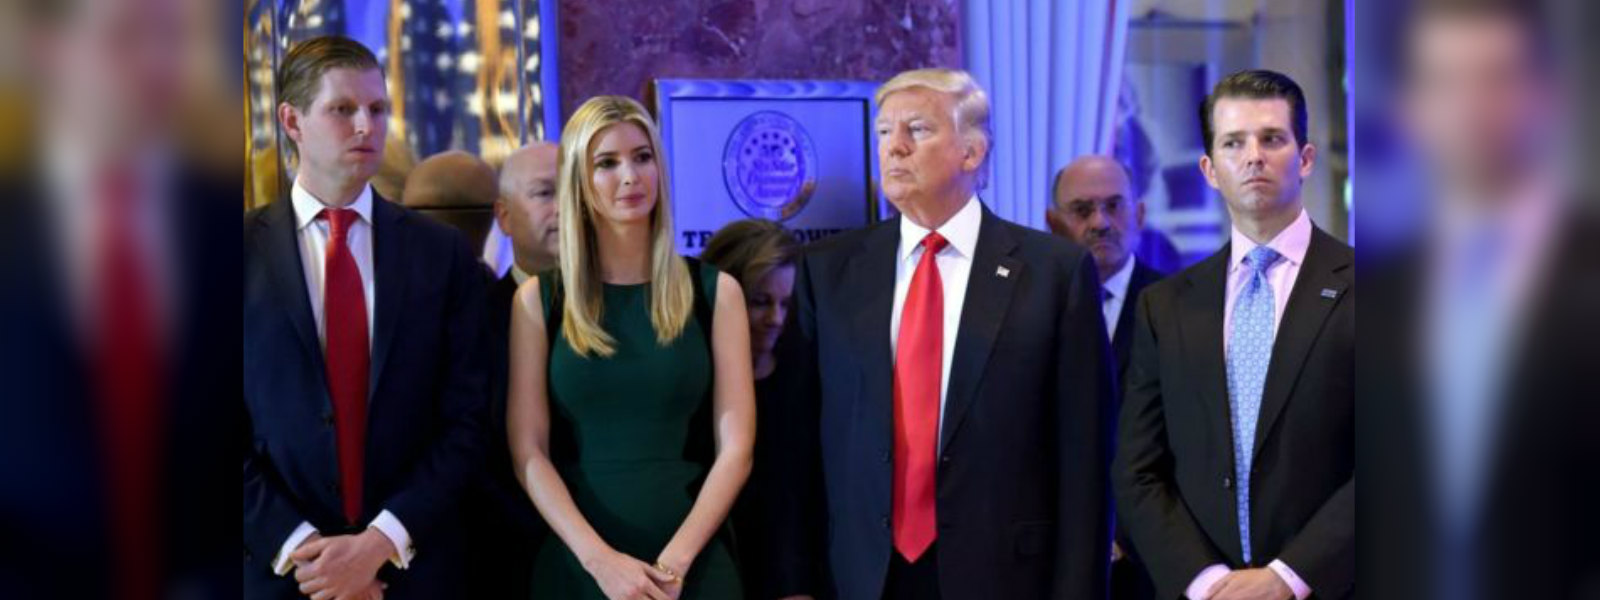 Trumps' Foundation sued by NY attorney general 